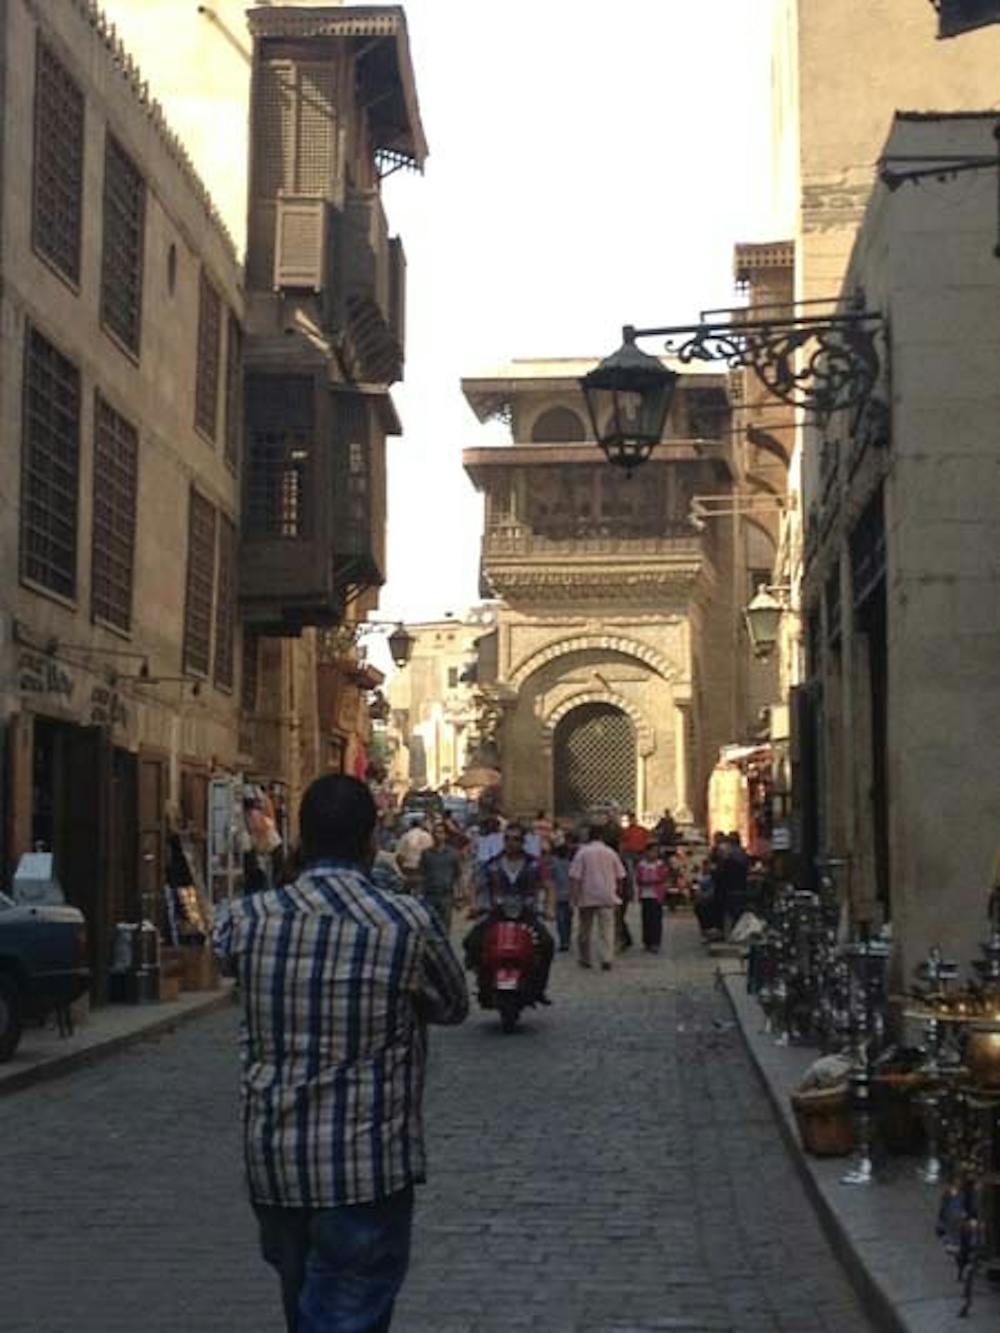 	The Khan el-Khalili souq  remains empty of foreign tourists more than a year after the end of the first phase of the revolution. Vendors complained of extreme decline in sales during the ongoing unrest.